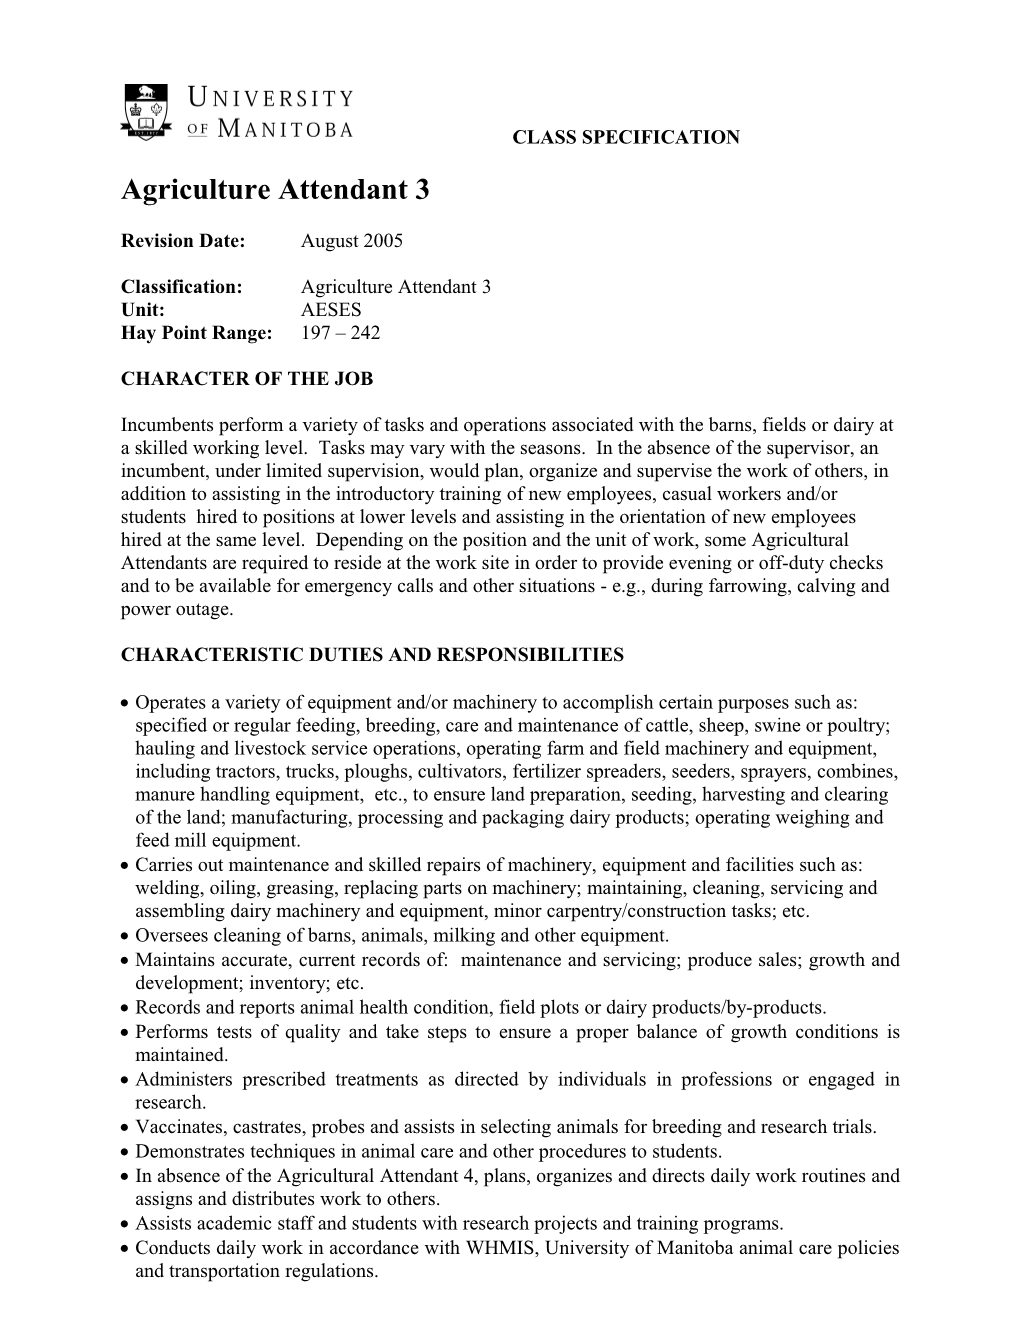 Agriculture Attendant 3